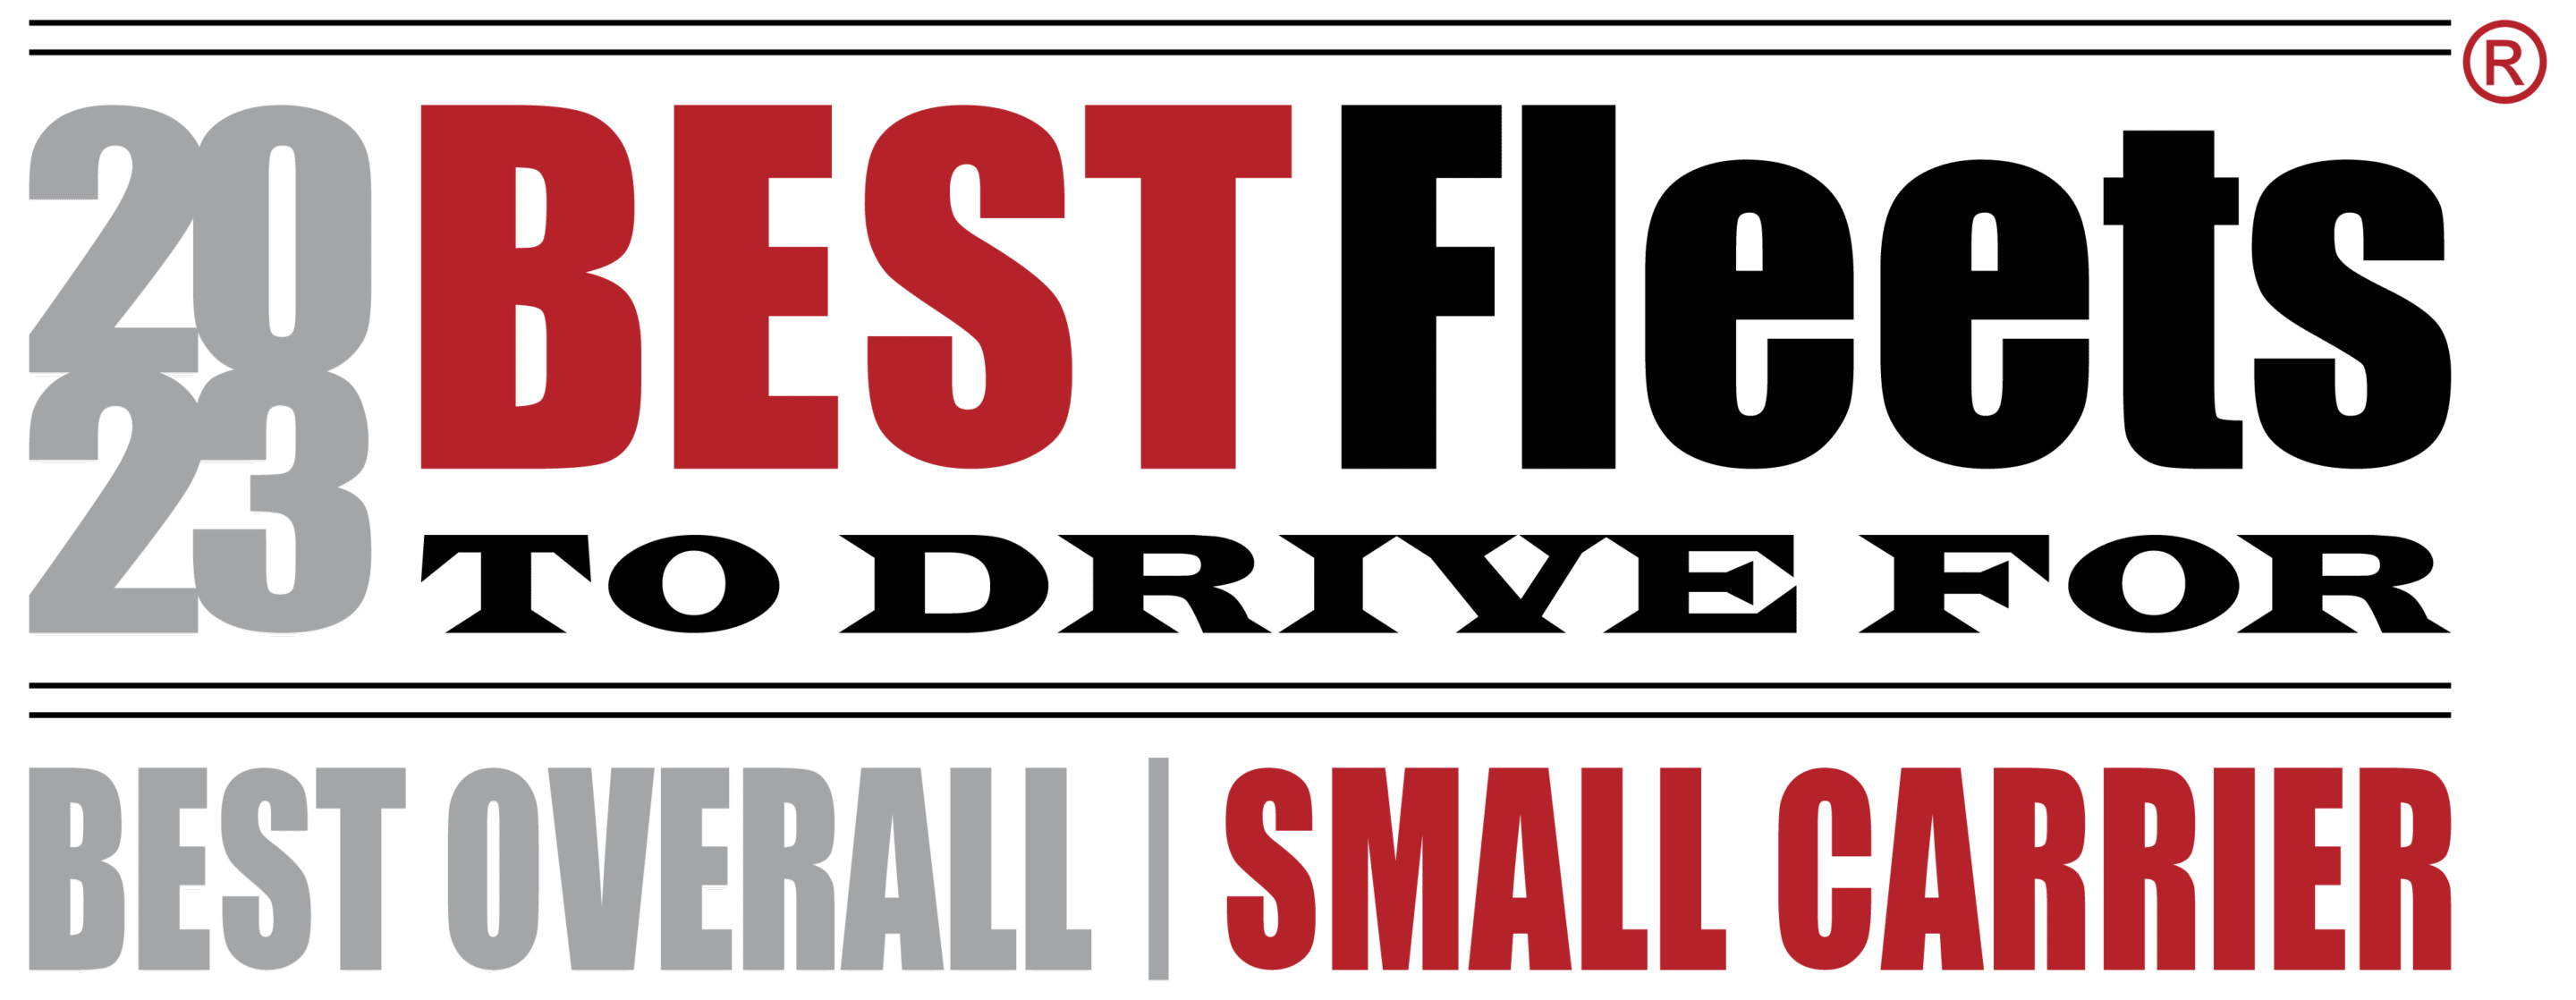 2023 best fleets to drive for, best overall in the small carrier category logo